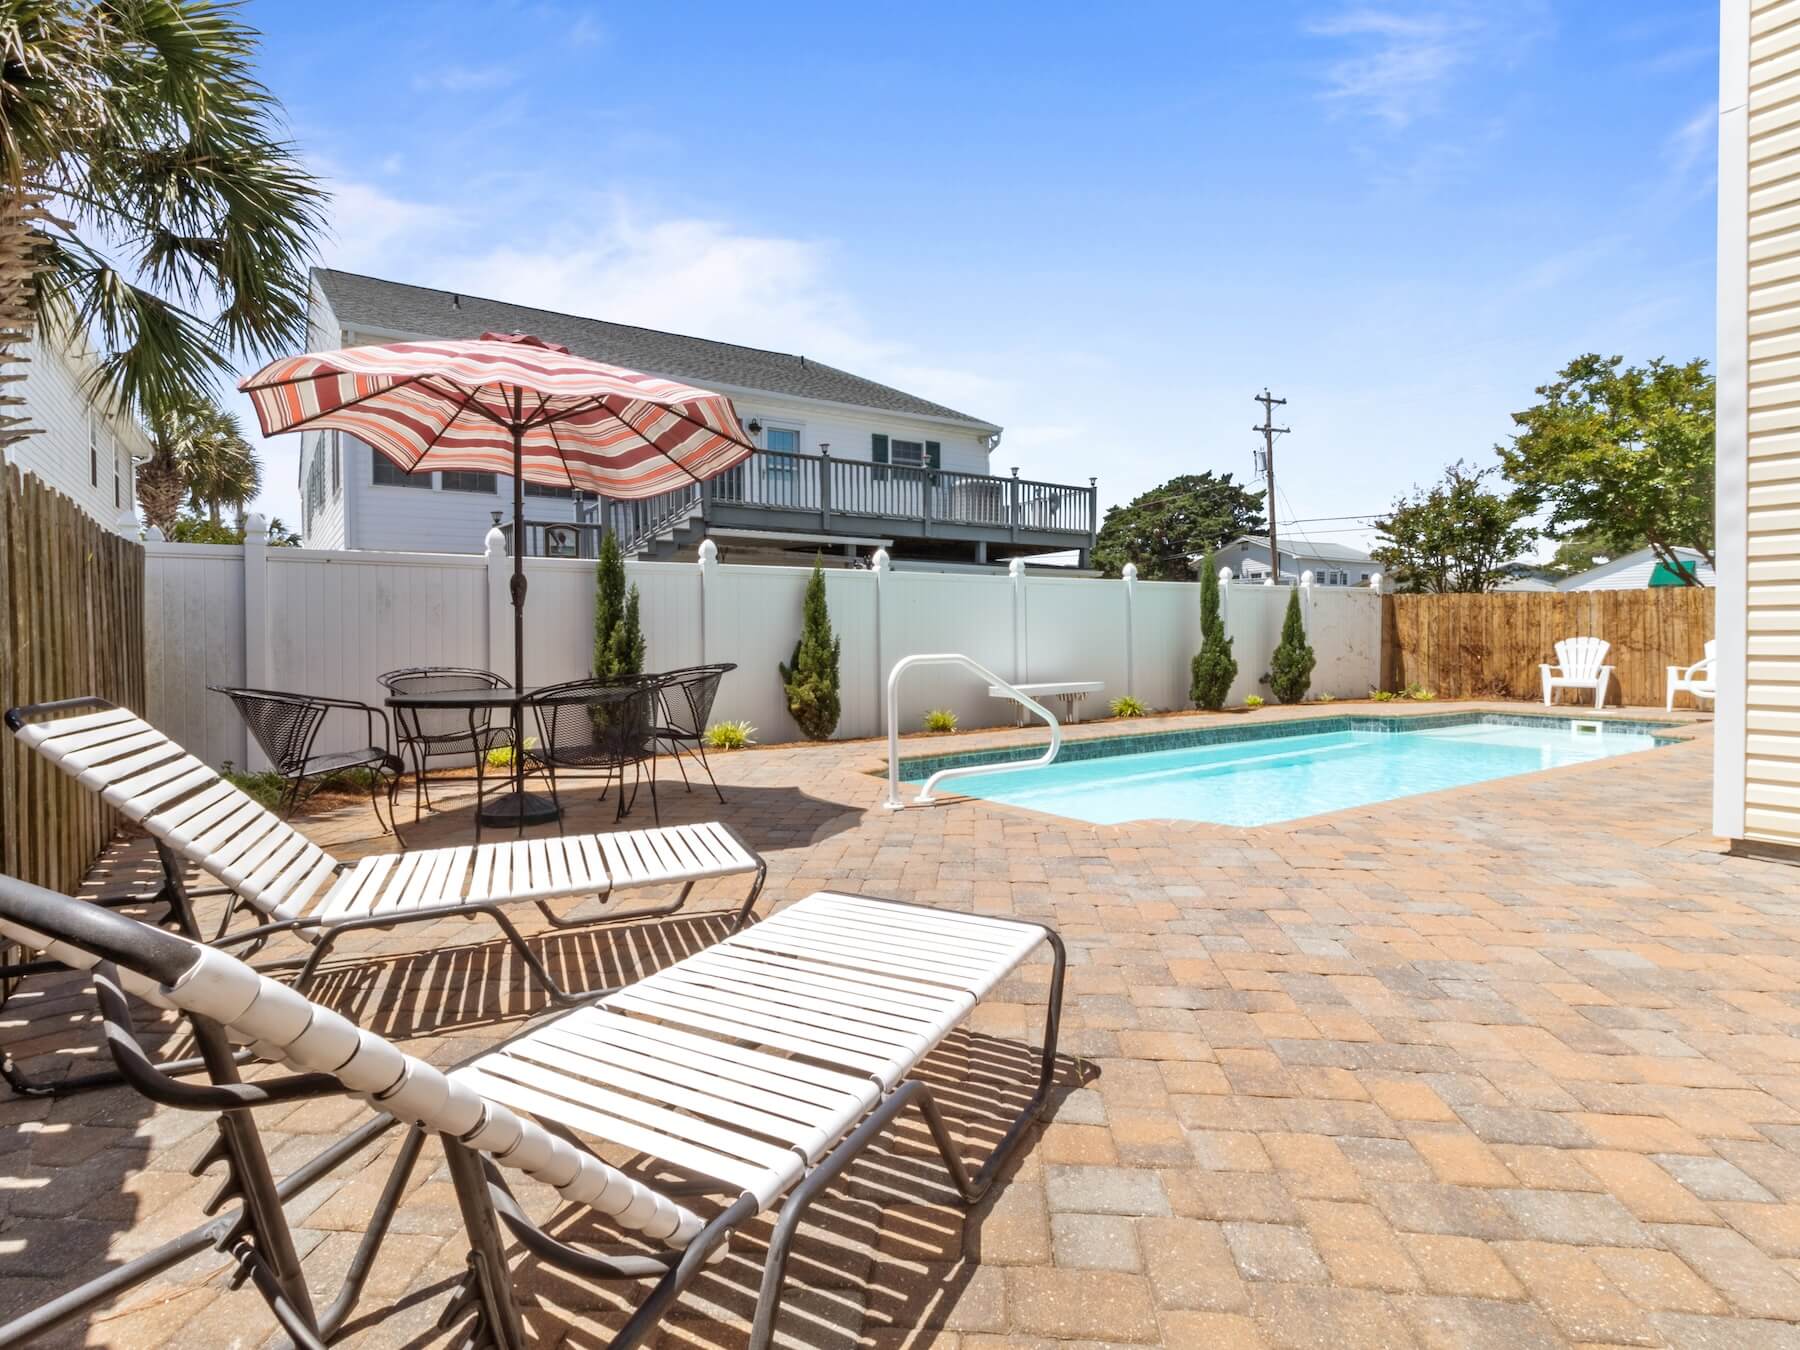 private pool and outdoor patio set at the cotton patch home in north myrtle beach